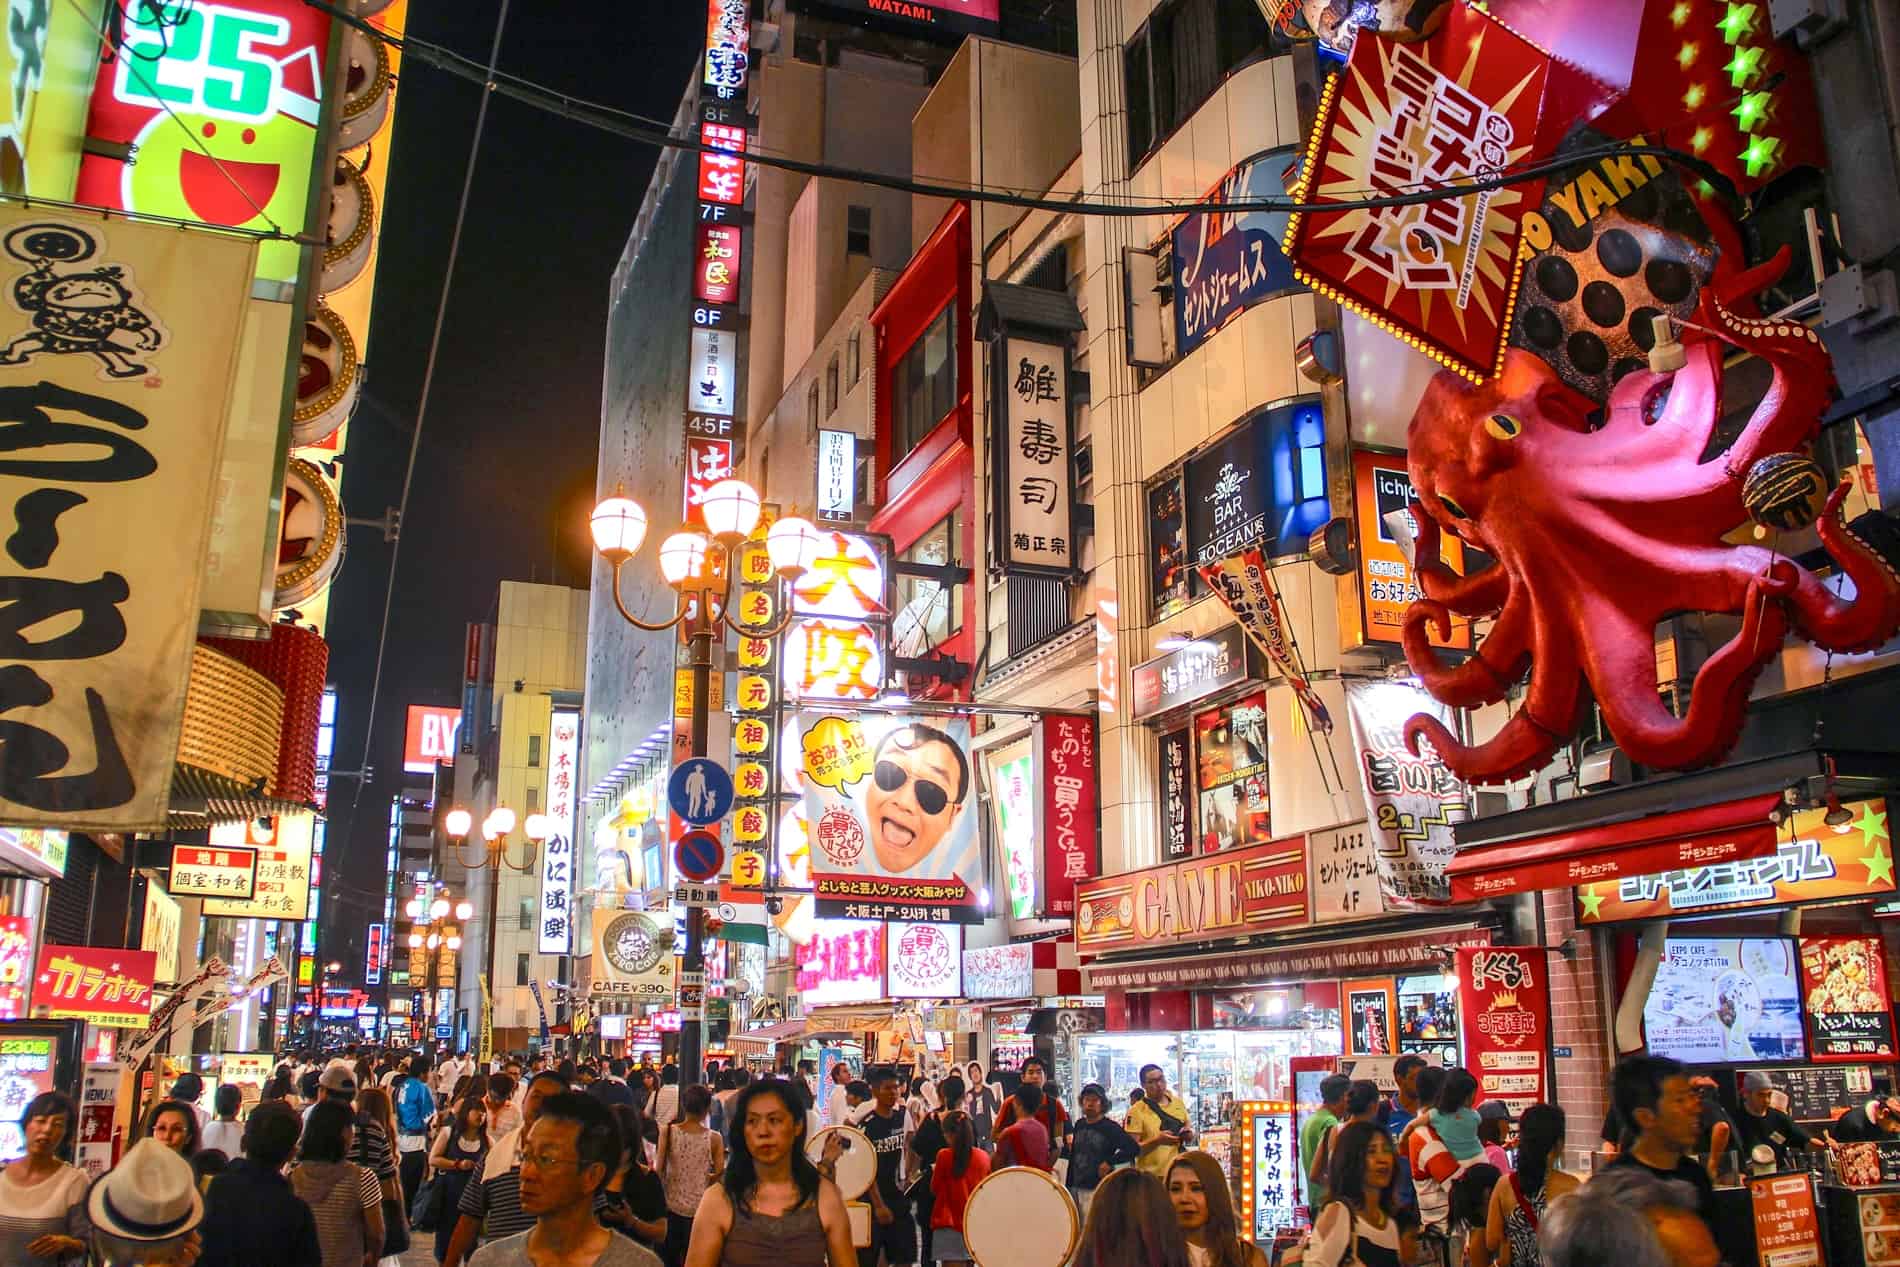 10 Best Places to Go Shopping in Osaka - Where to Shop in Osaka